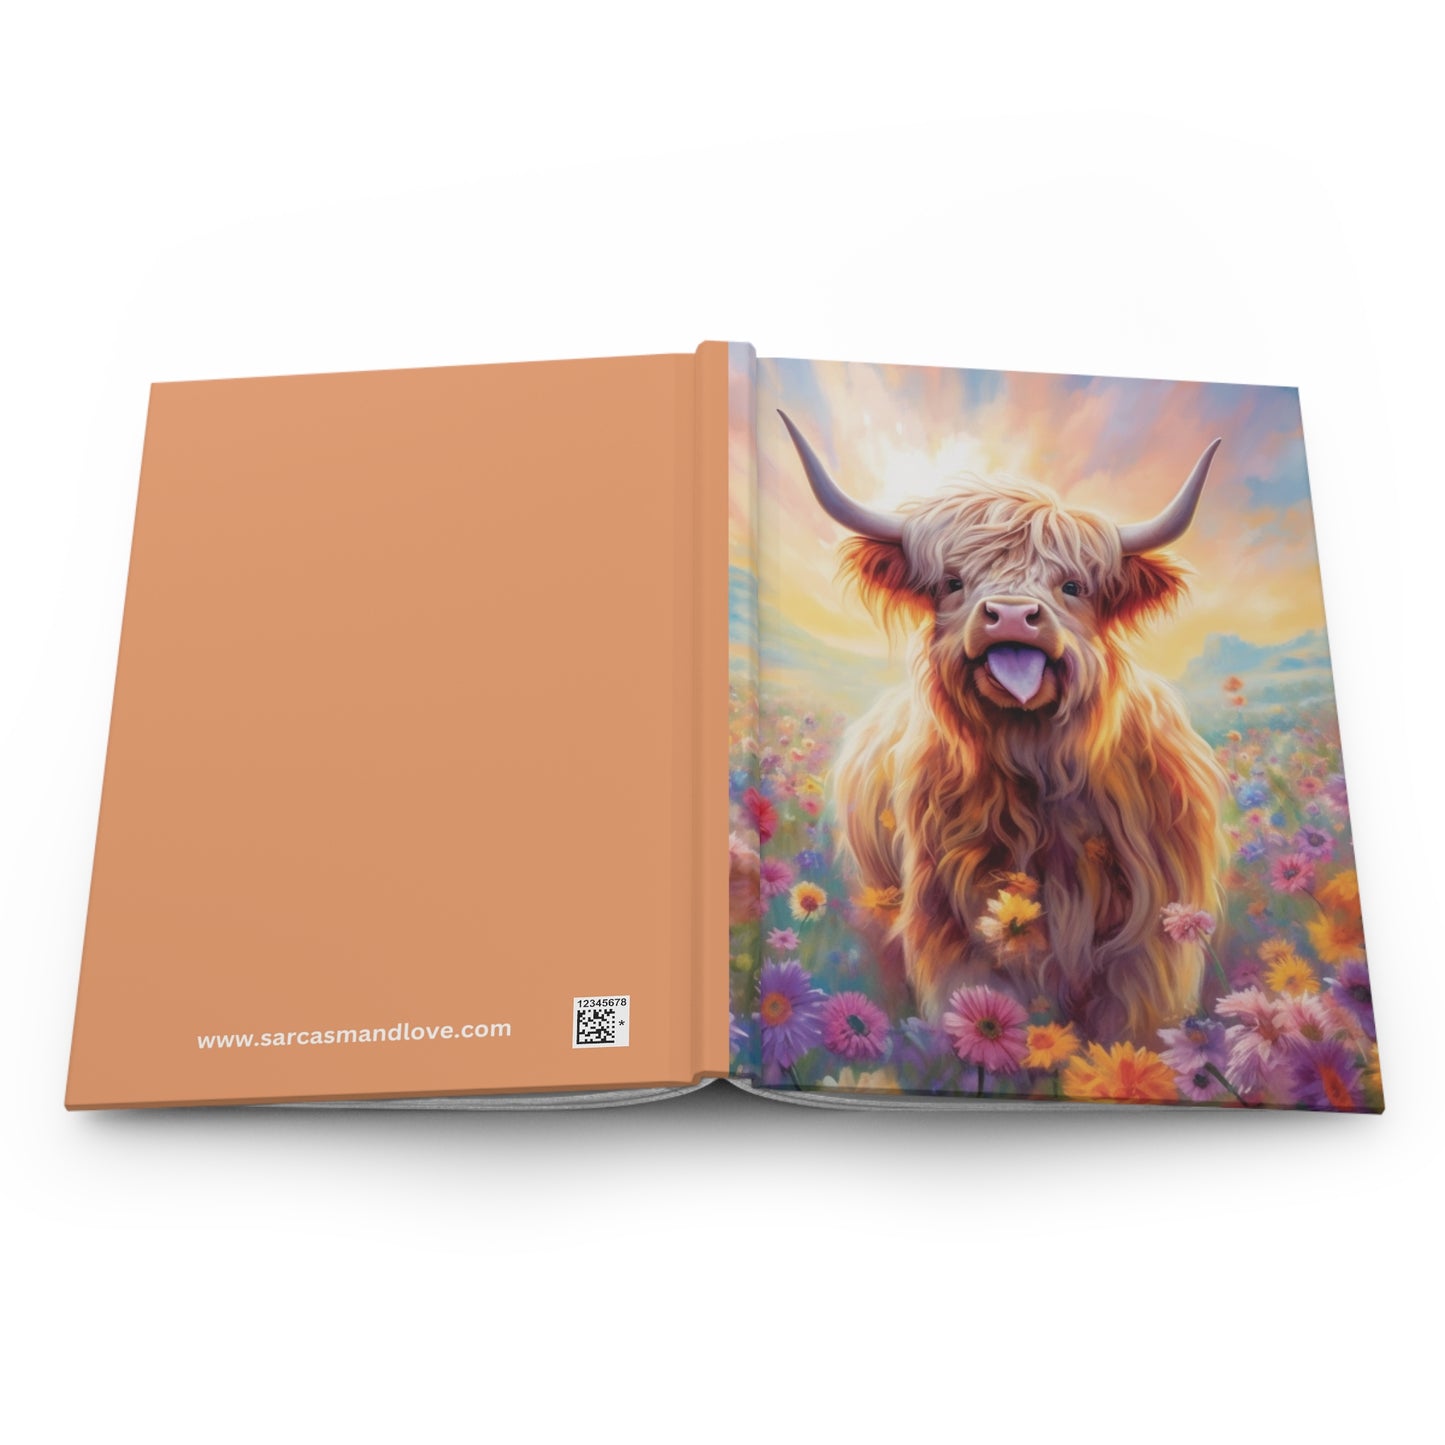 Highland Cattle Hardcover Notebook, Tongue Out in Wildflower Meadow, Lined Journal, Self Care Diary, Gratitude and Wellness Planner